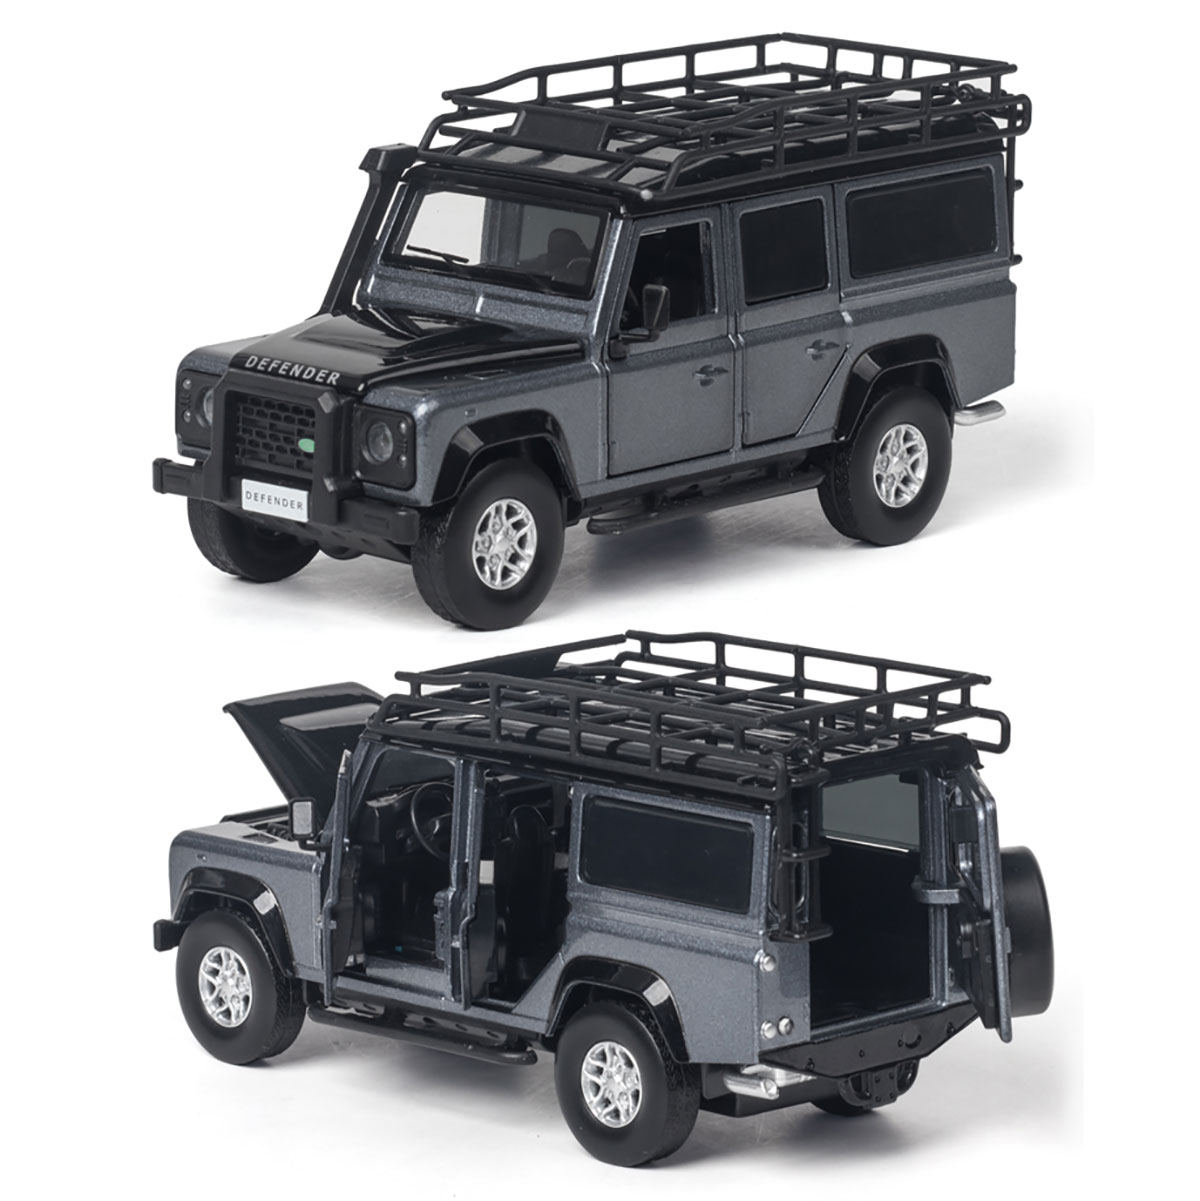 132-Alloy-Land-Rovers-Defenders-Rear-Wheel-Pull-Back-Diecast-Car-Model-Toy-with-Sound-Light-for-Gift-1722618-9